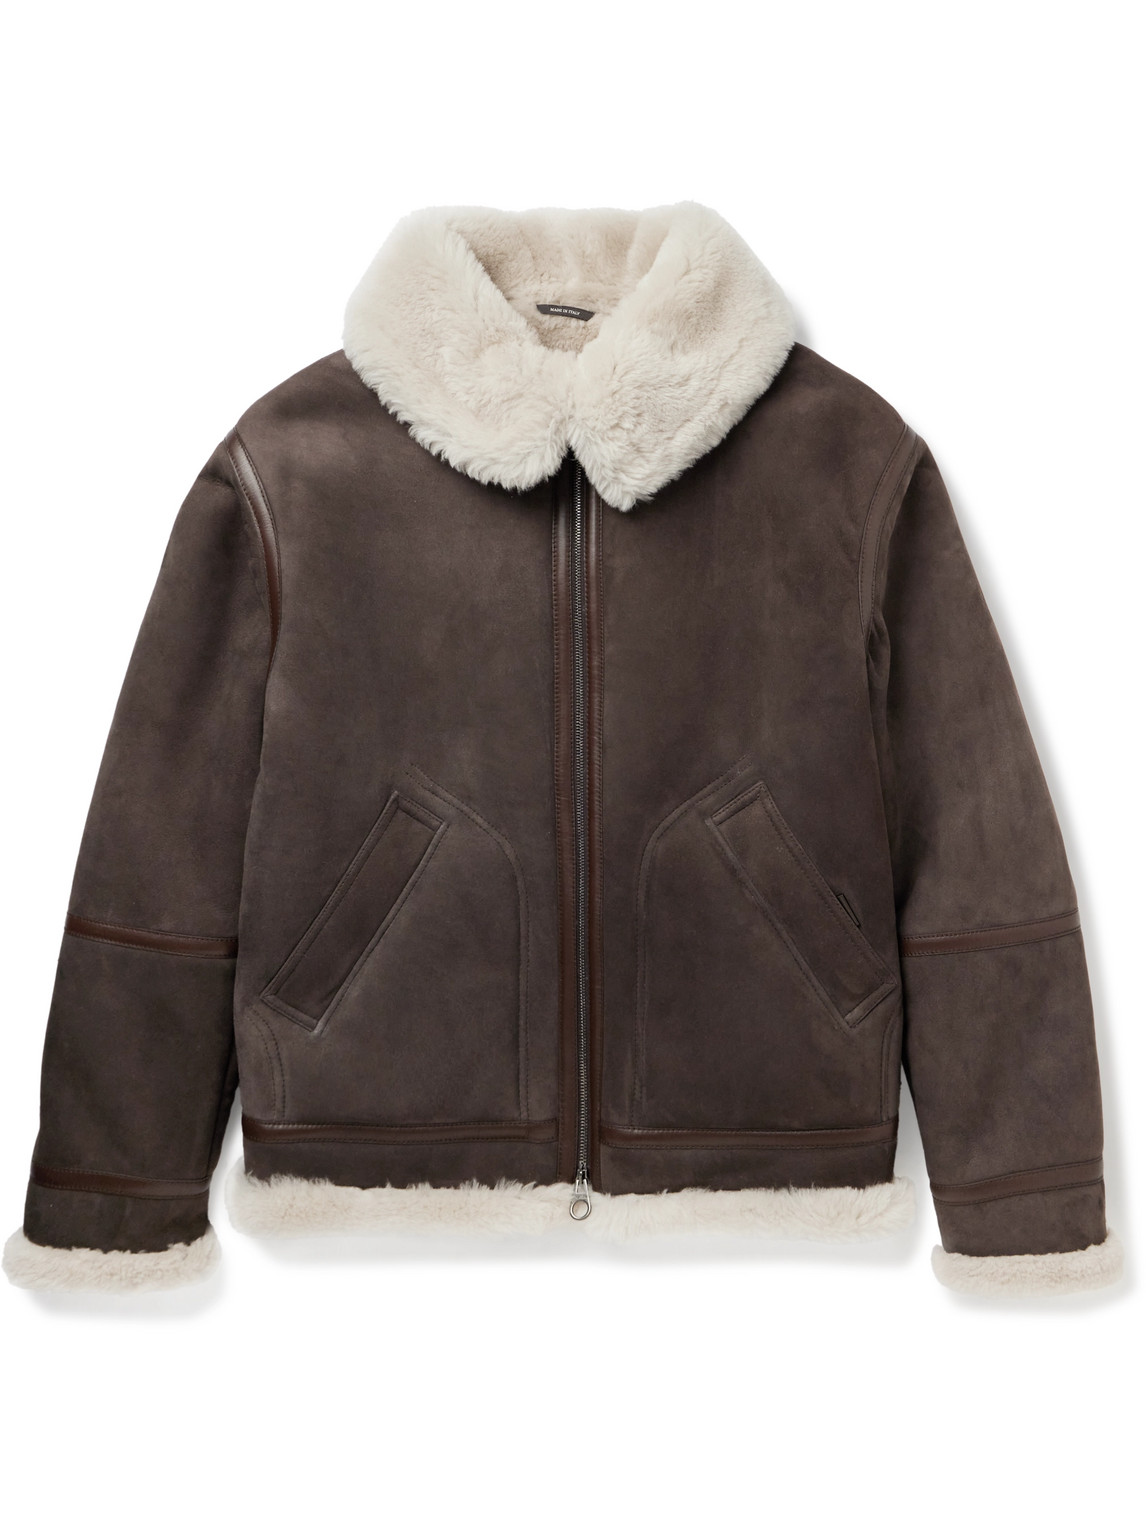 Leather-Trimmed Shearling Jacket